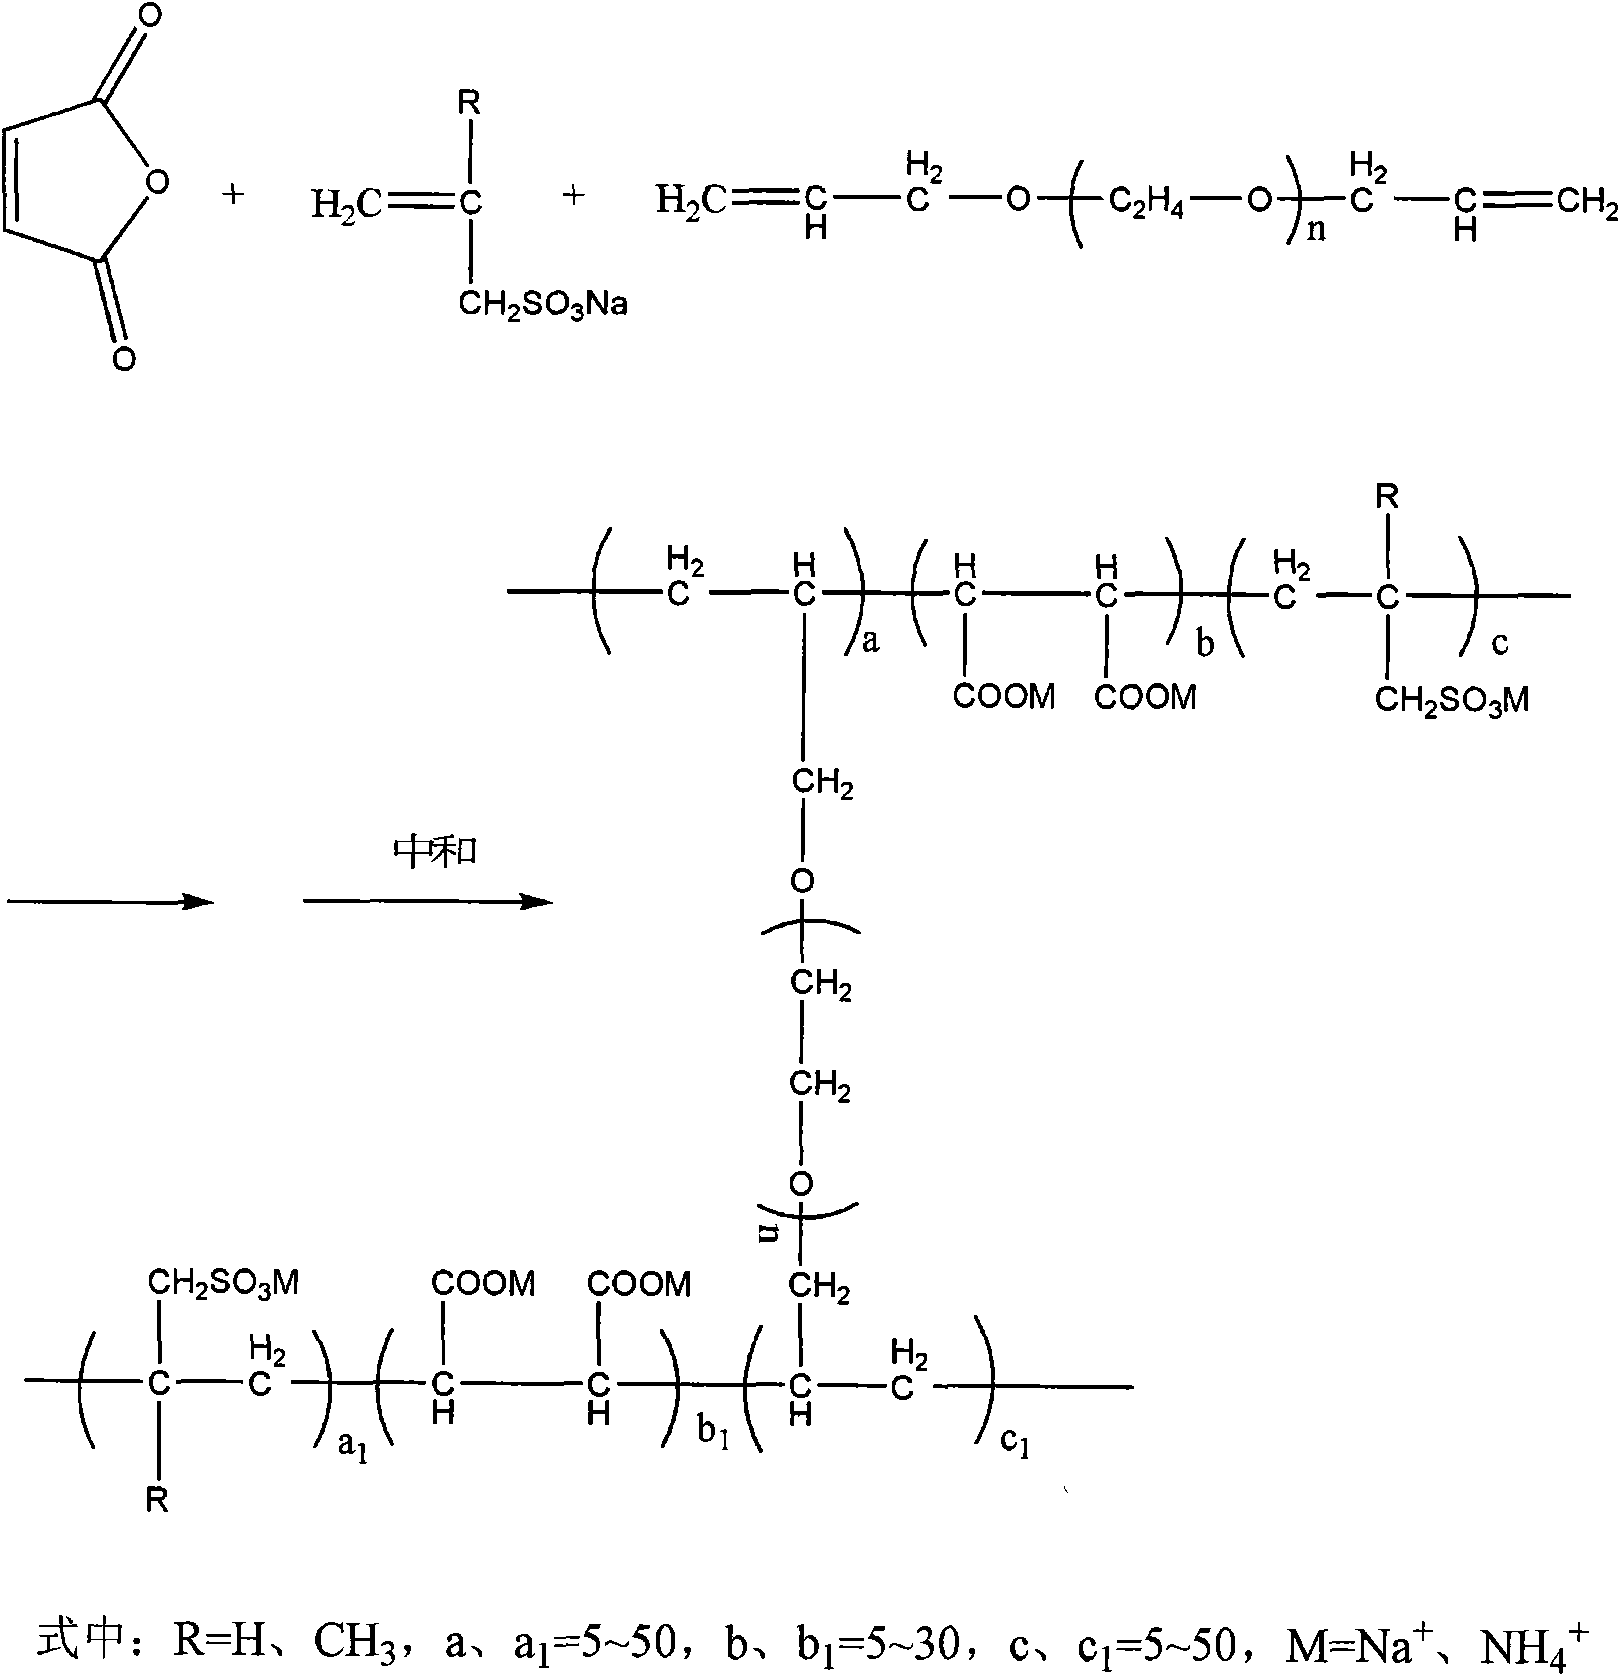 Polycarboxylic acid water reducing agent using diallyl polyethylene glycol (DAPEG) as raw material and preparation method thereof